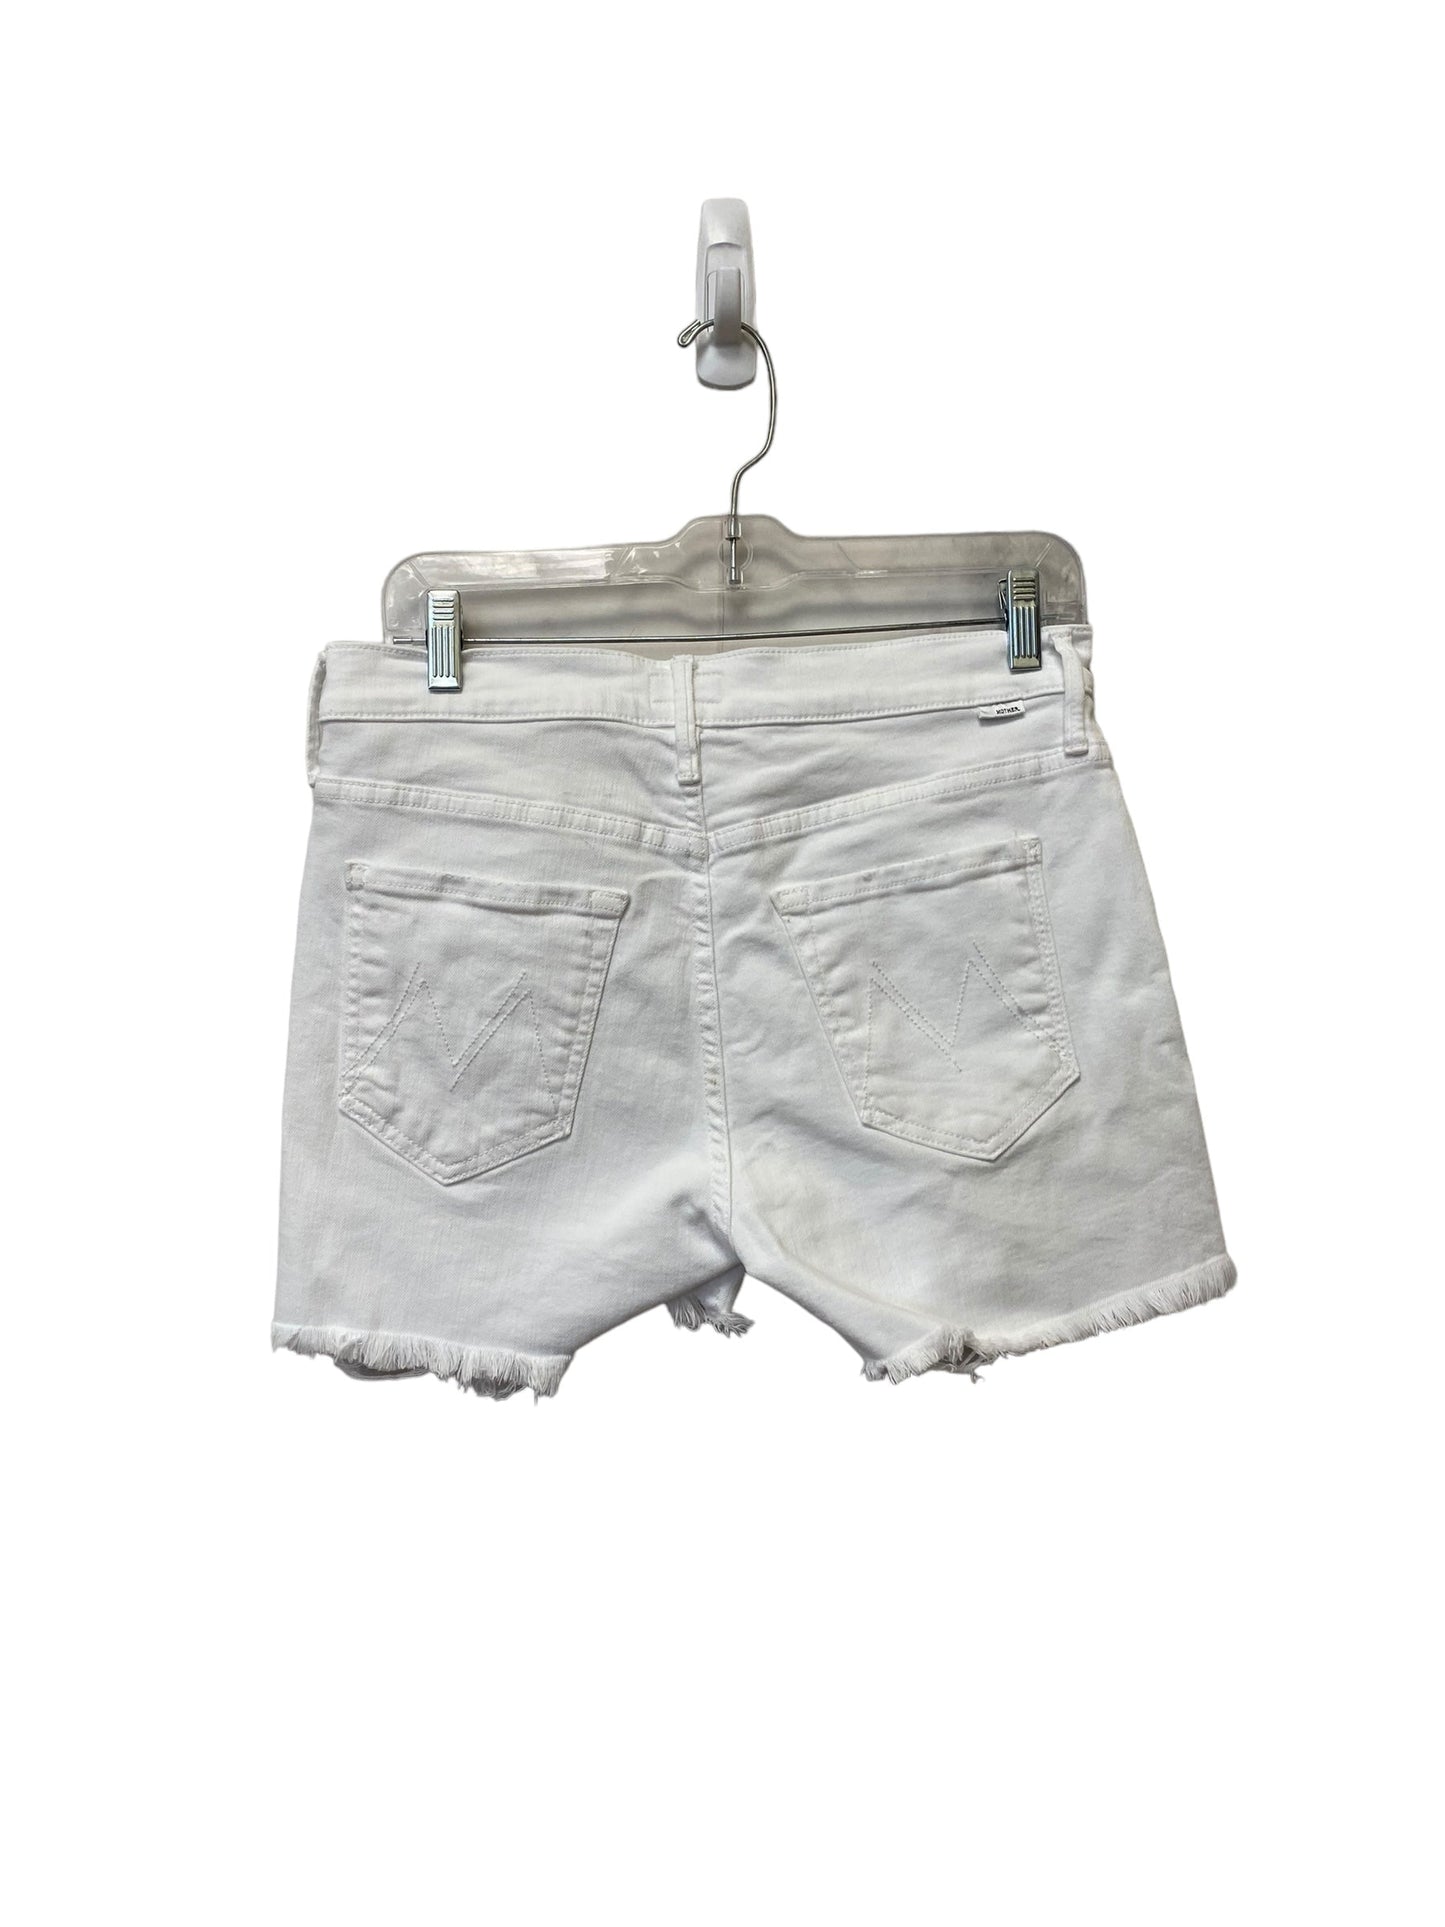 White Shorts Mother, Size 27